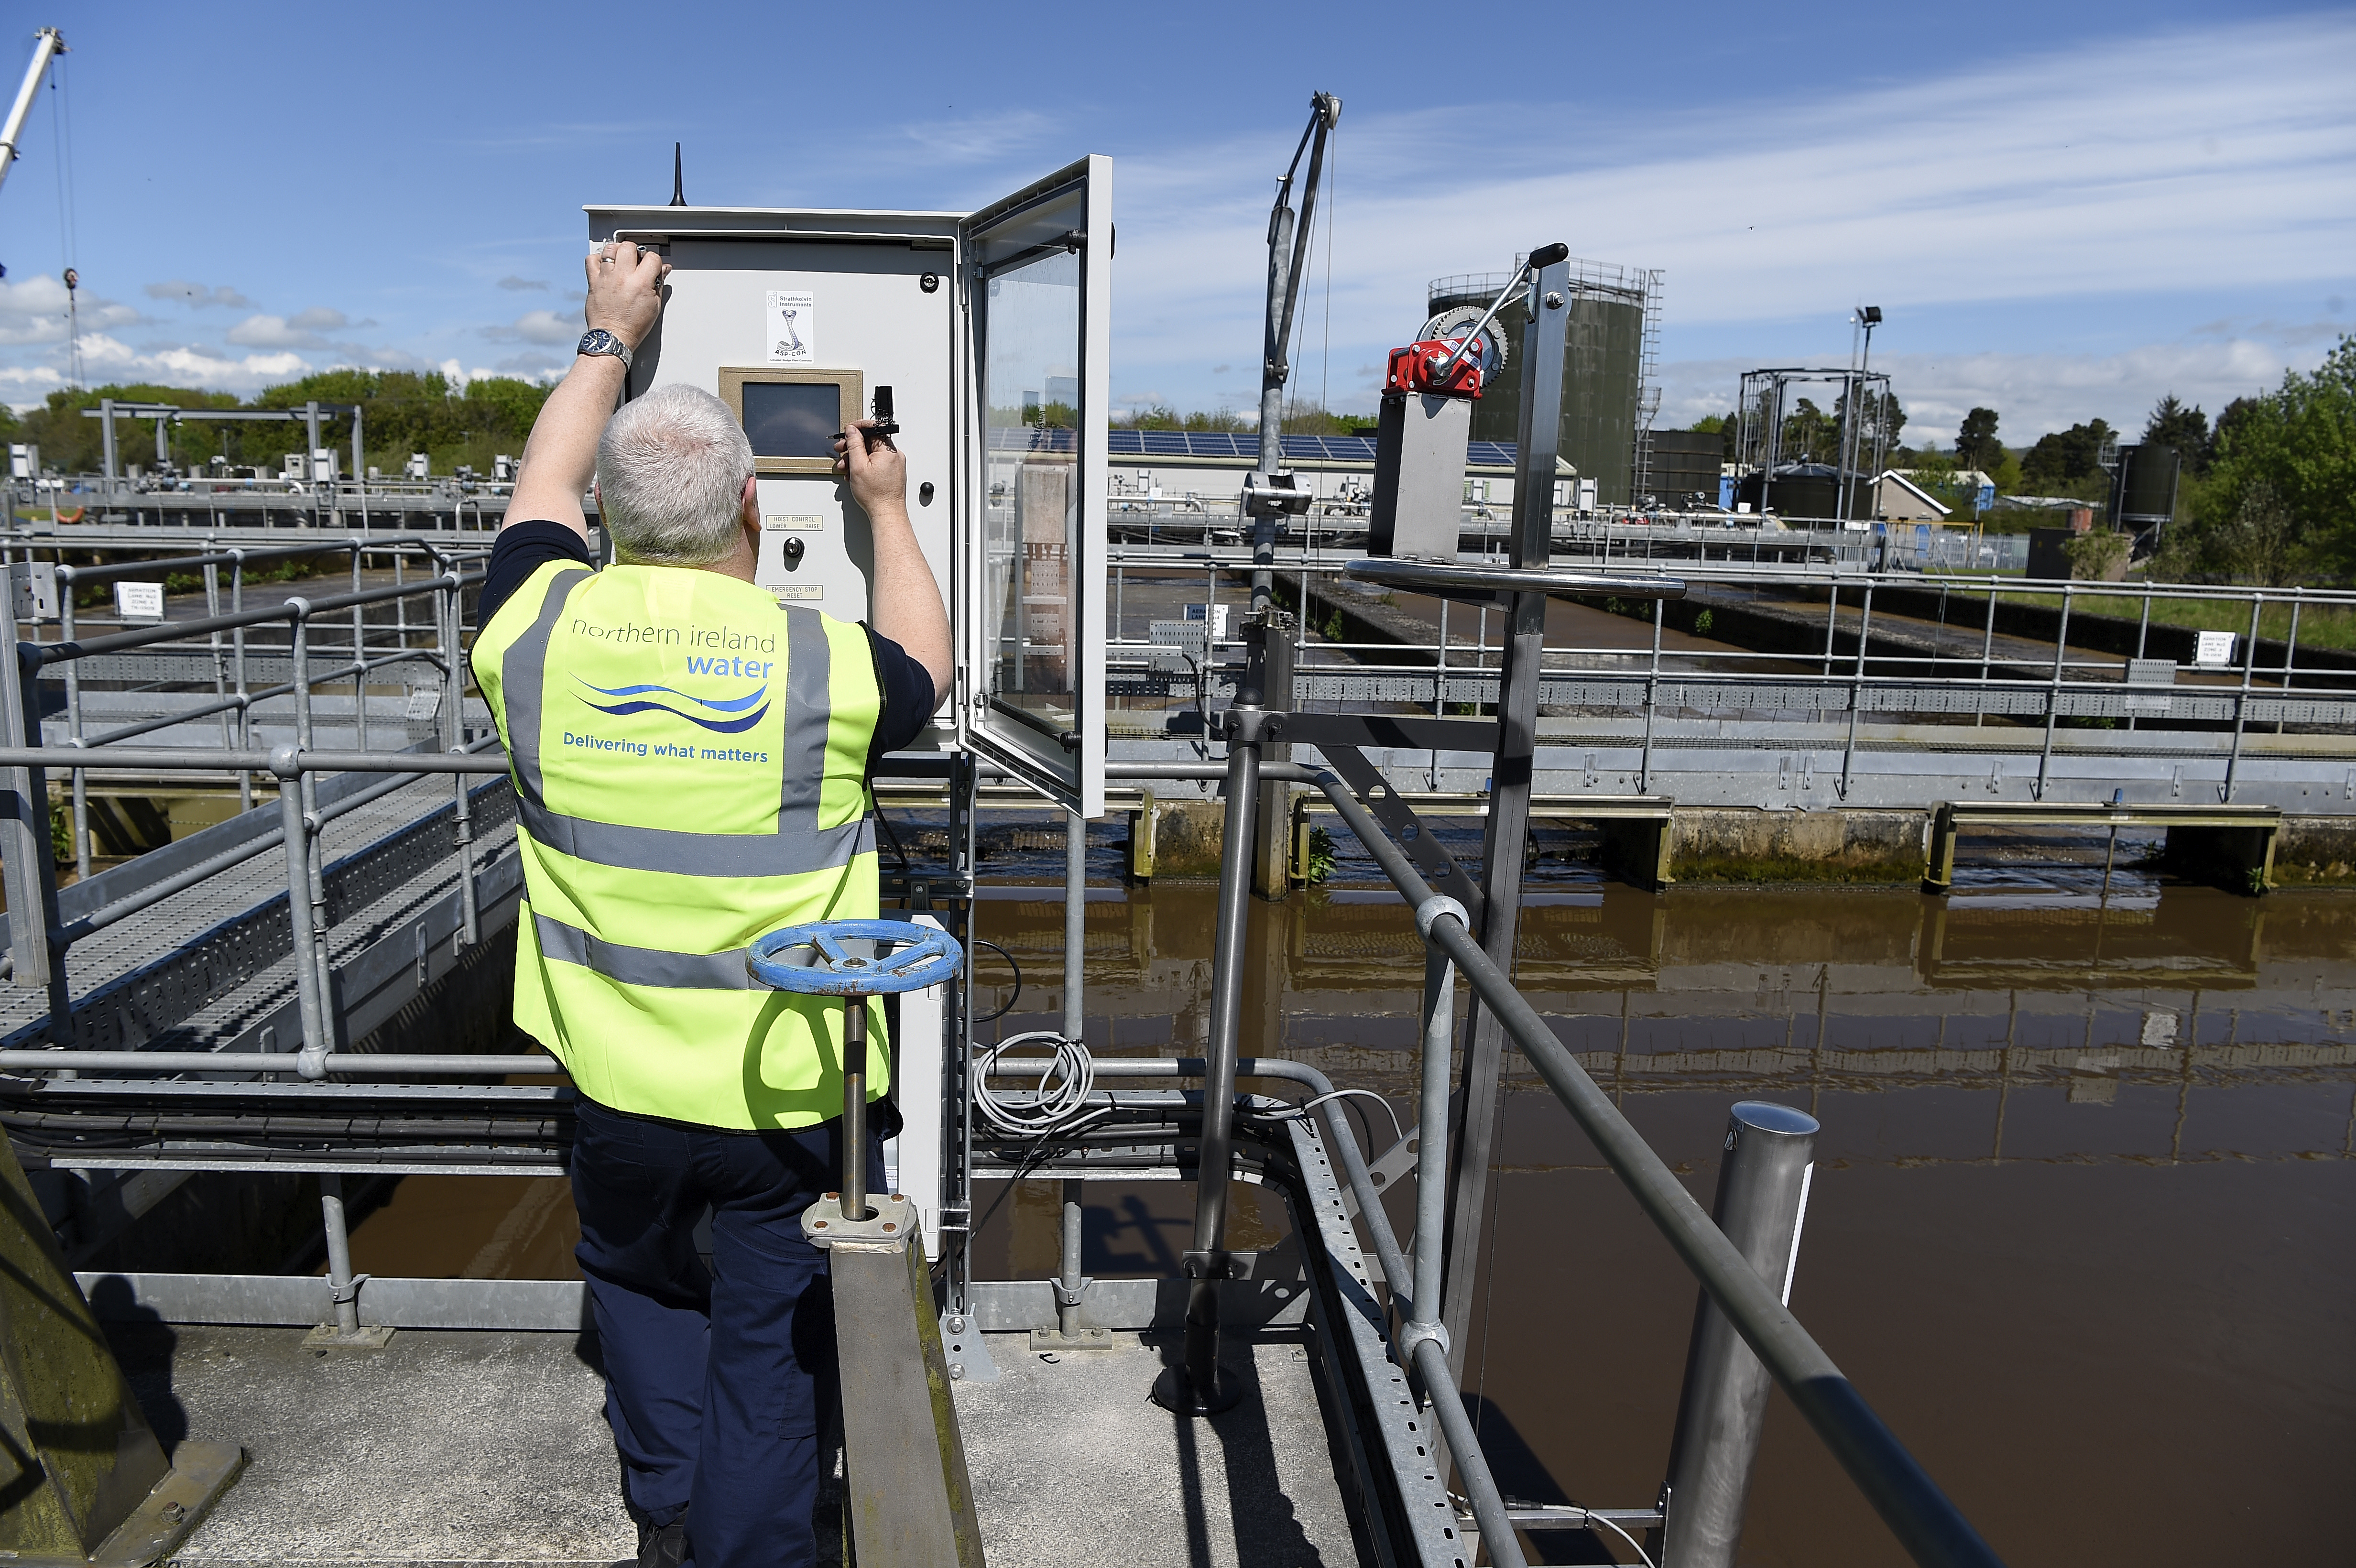 Northern Ireland Water employee checking machine at a waste water treatment works location